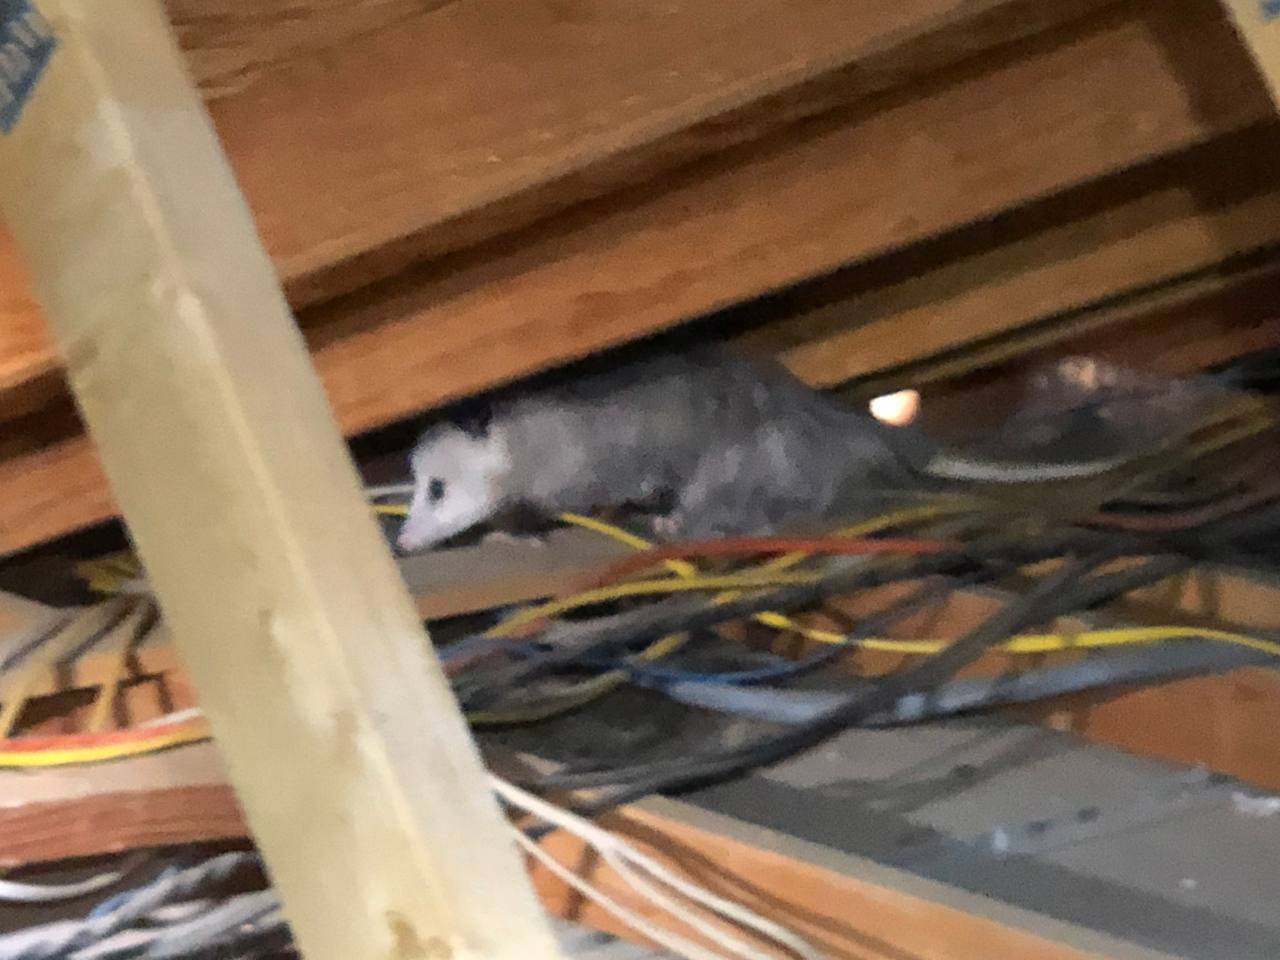 Rodent in someone's attic